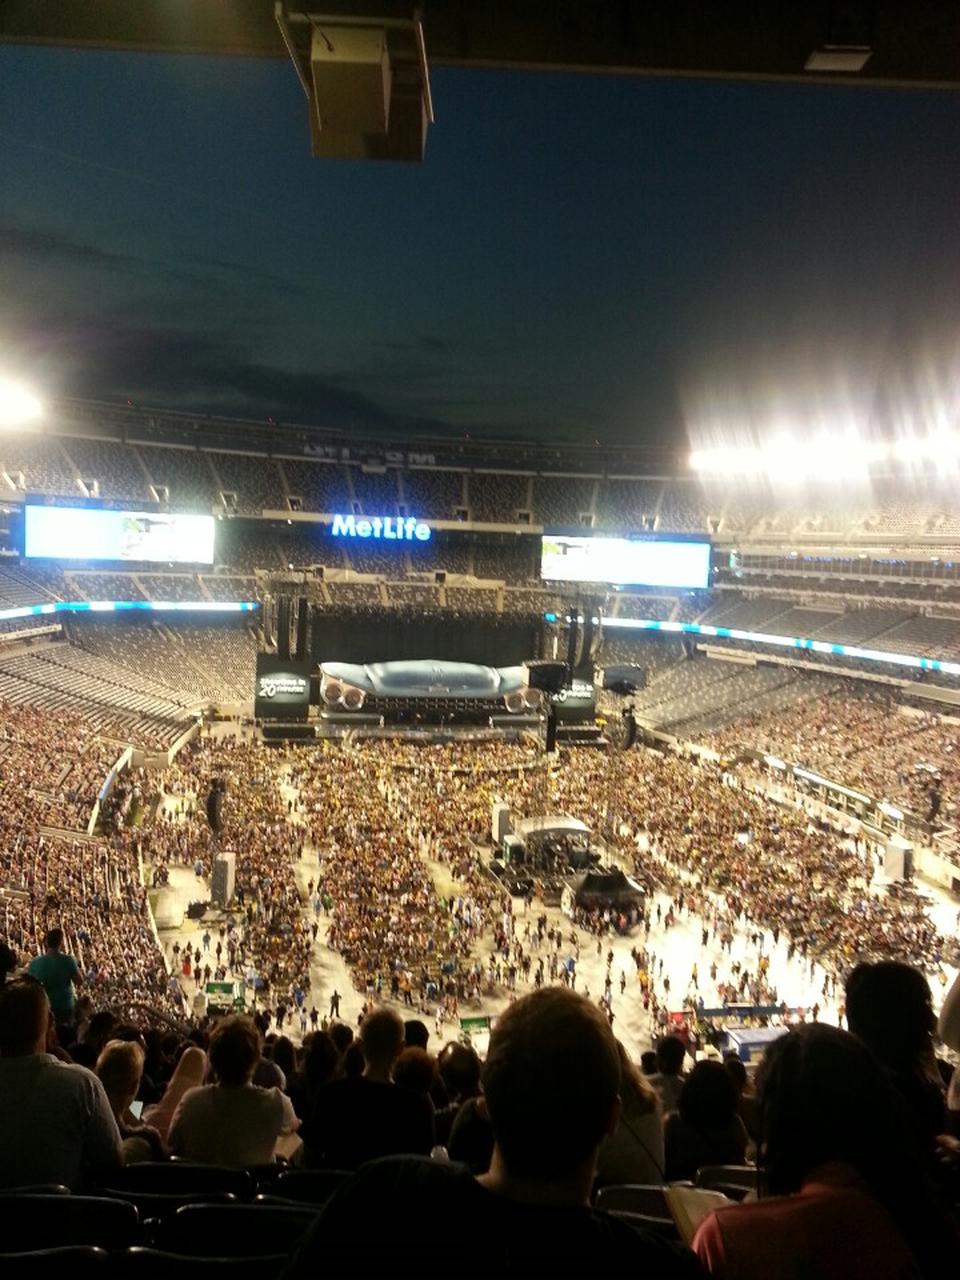 section 228b seat view  for concert - metlife stadium